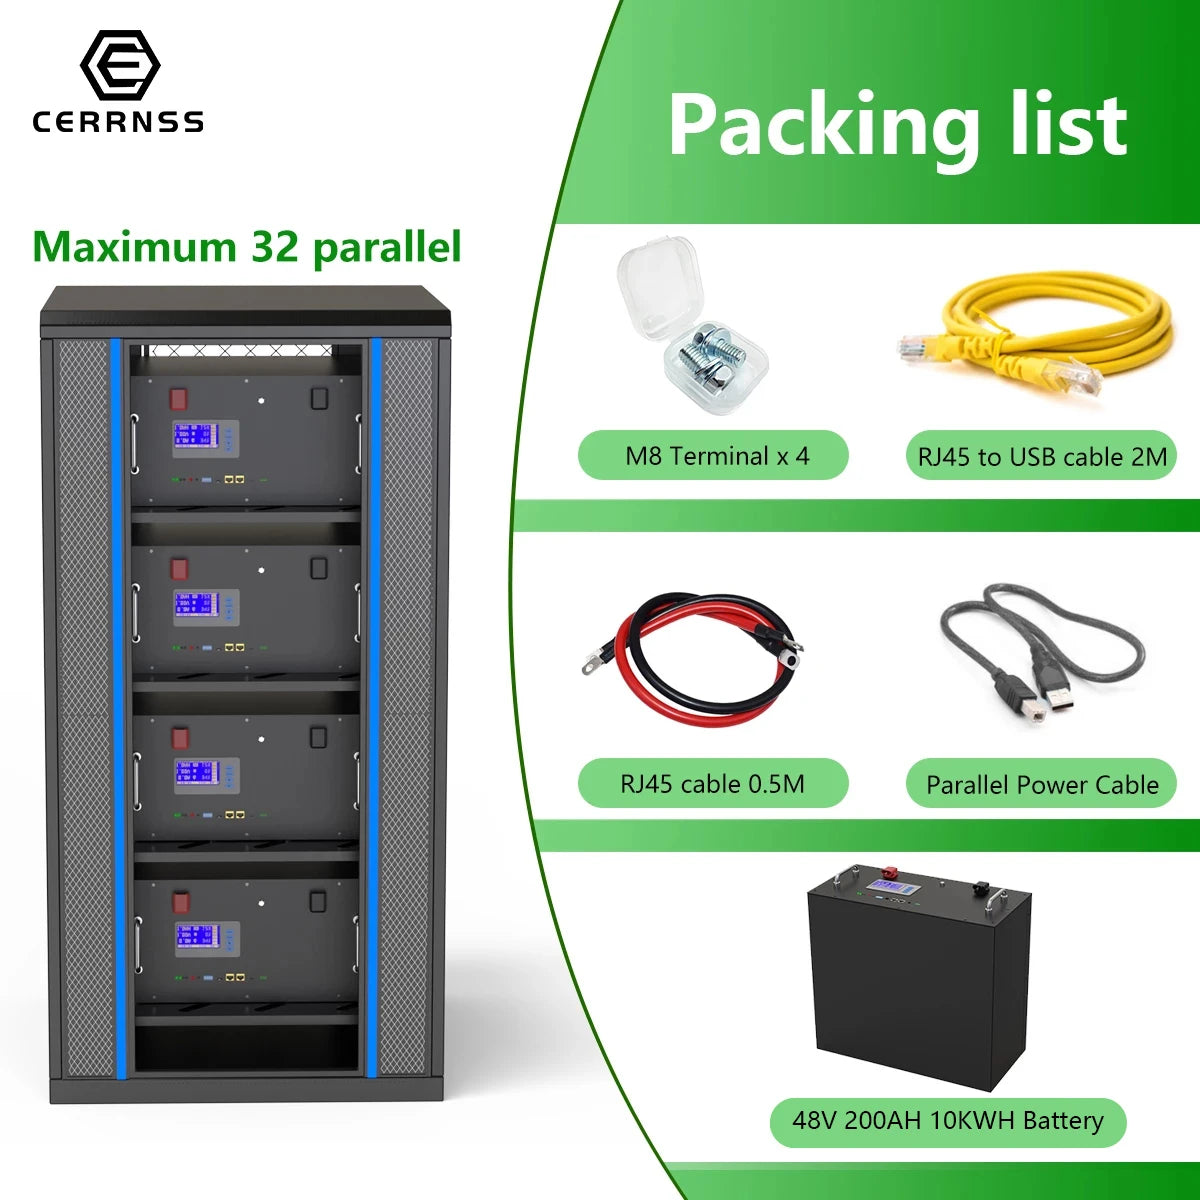 LiFePO4 48V 200AH 10KW Battery, Packaging includes 32-terminals, power cables, and accessories for a single 48V 200Ah 10kW LiFePO4 battery.